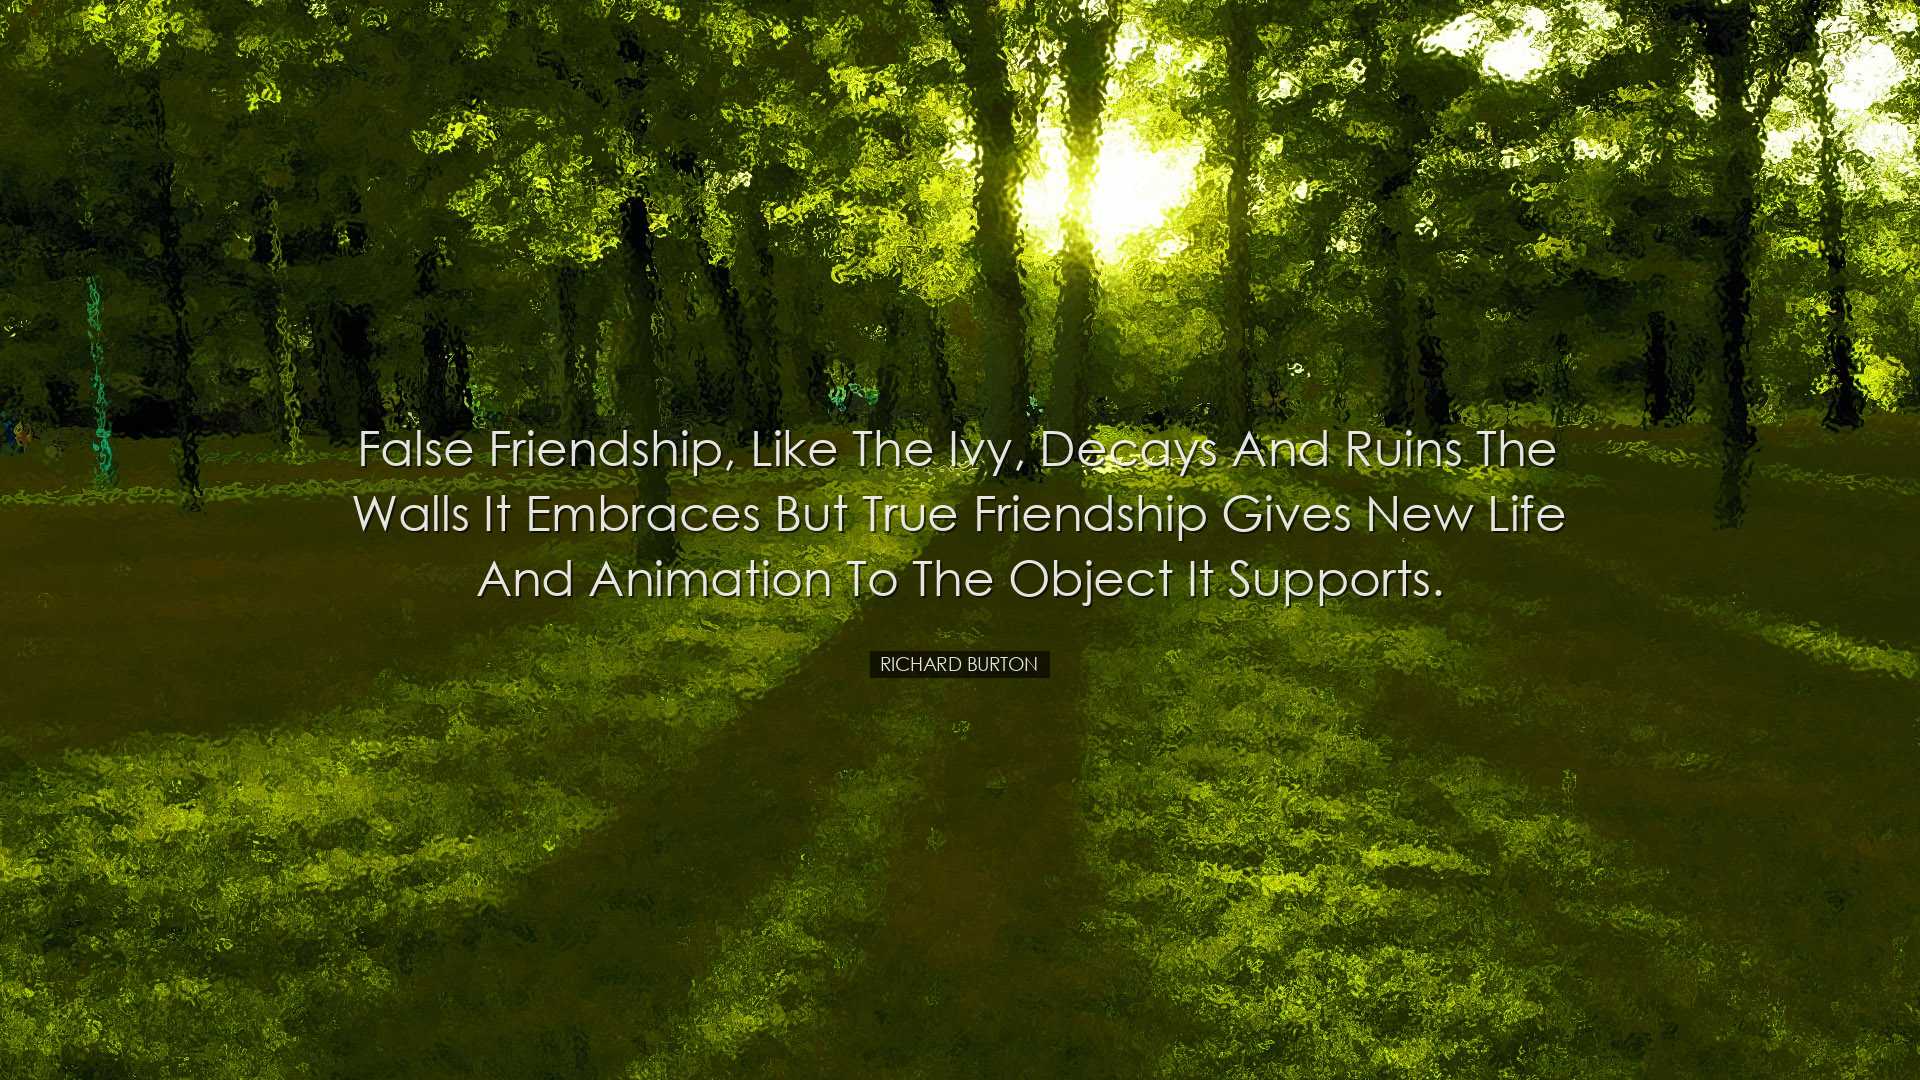 False friendship, like the ivy, decays and ruins the walls it embr